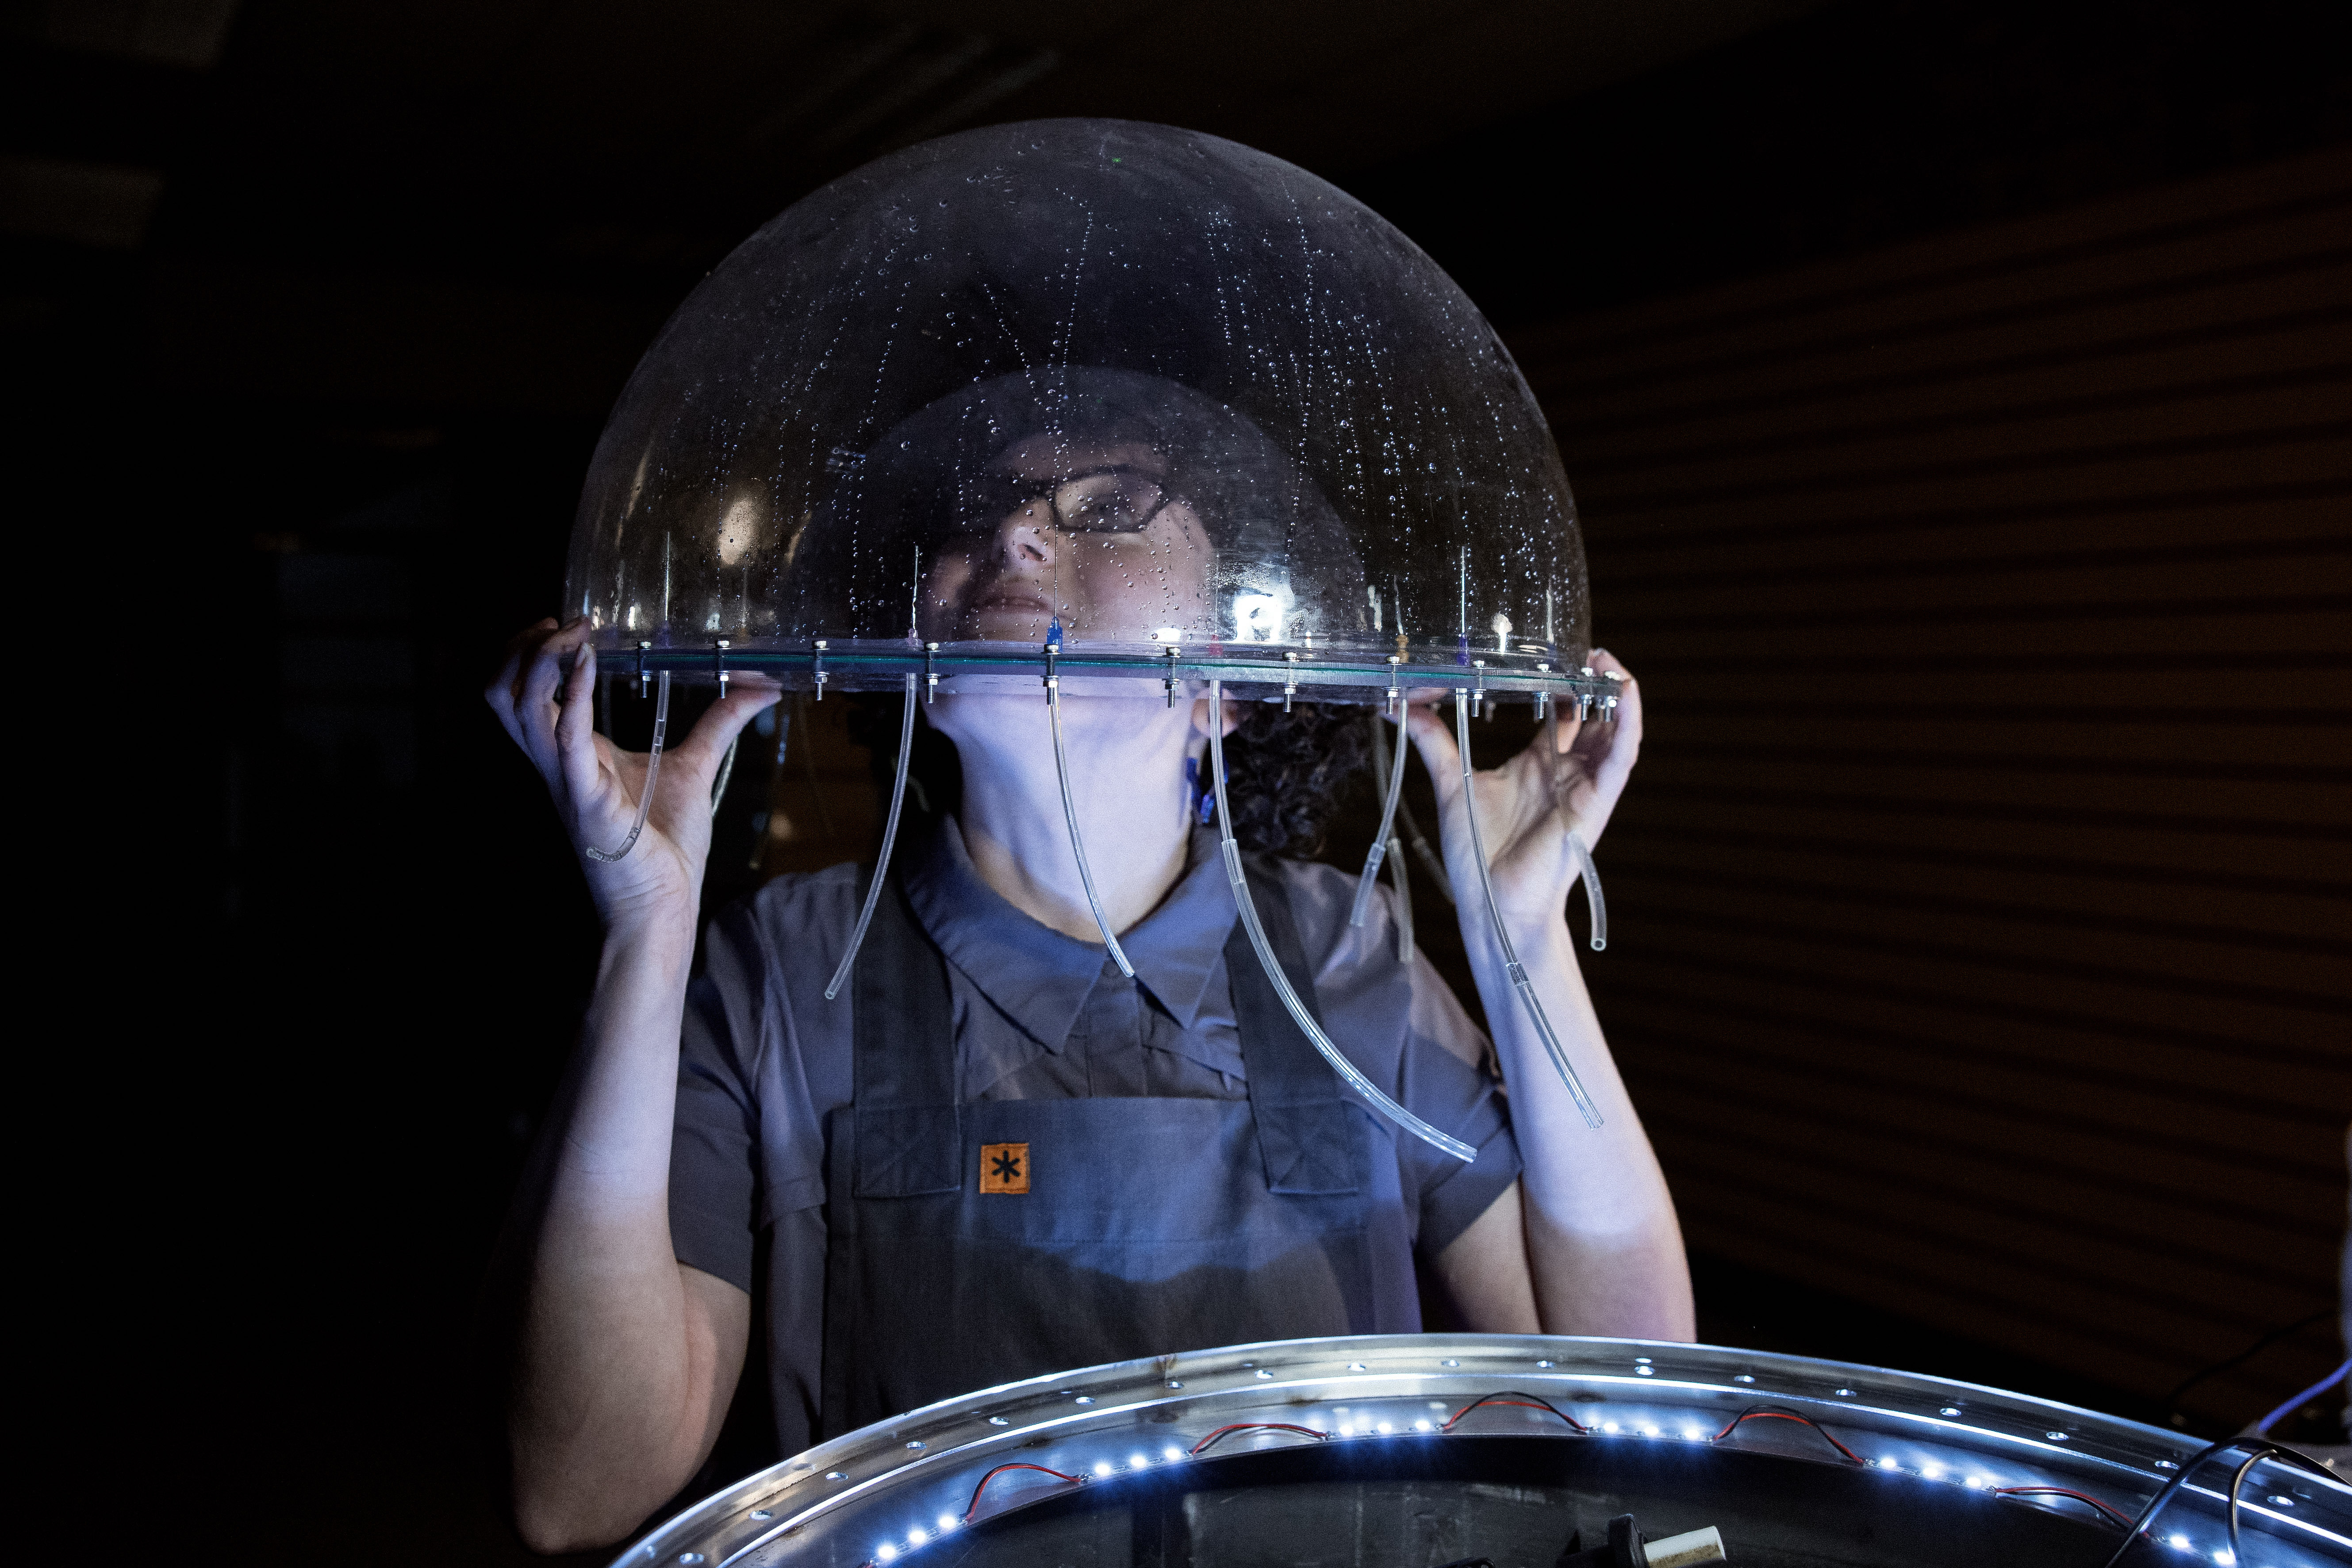 a person with their head inside a clear bubble-like plastic dome